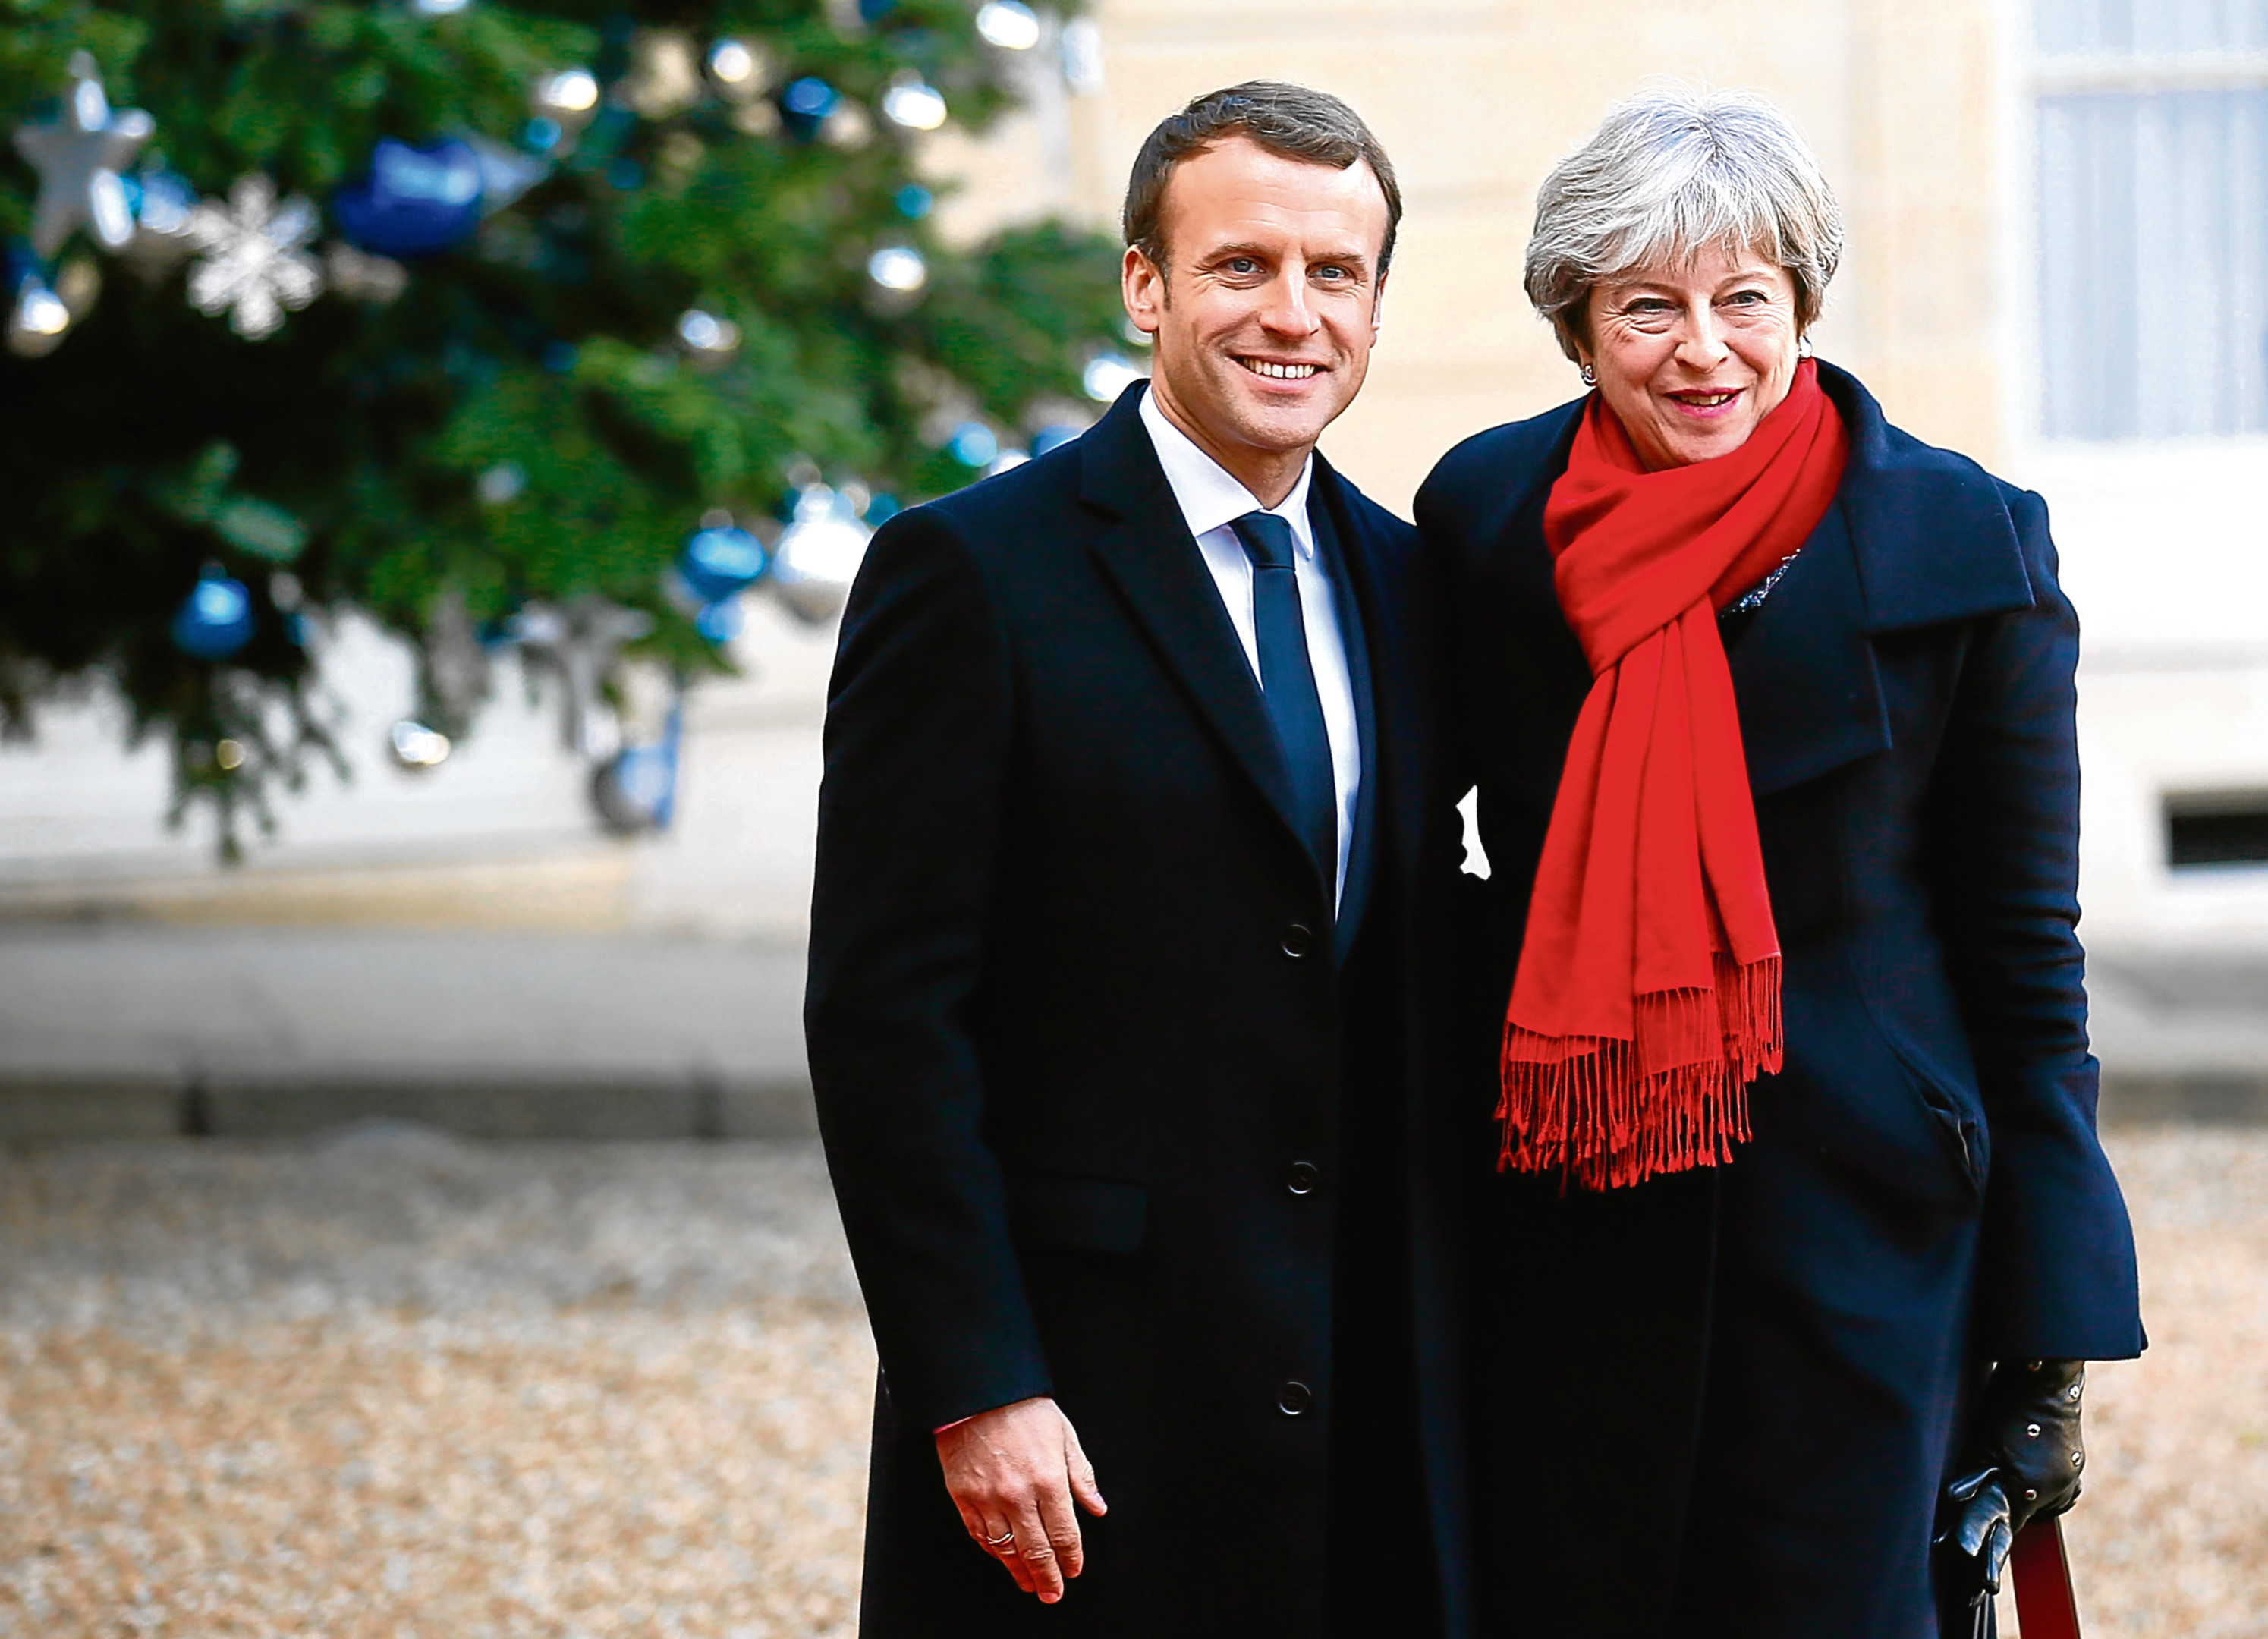 British Prime Minister Theresa May is welcomed by French President before a lunch at the Elysee Palace in Paris, Tuesday, Dec. 12, 2017. (AP Photo/Francois Mori)